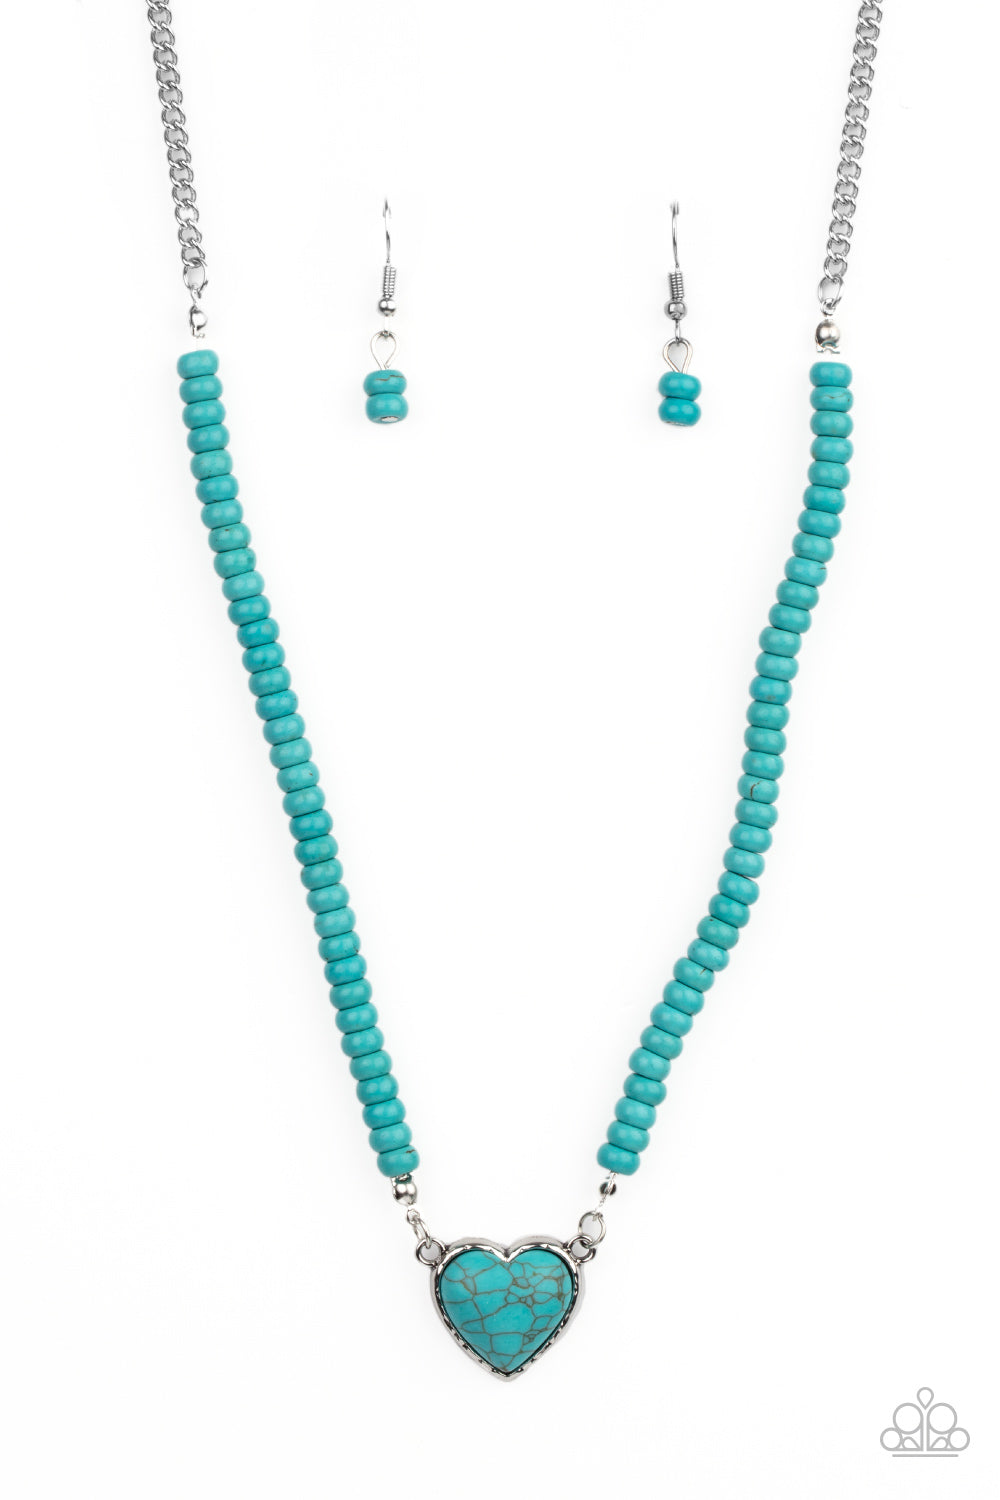 Paparazzi Accessories - Country Sweetheart #N580 - Blue Necklace